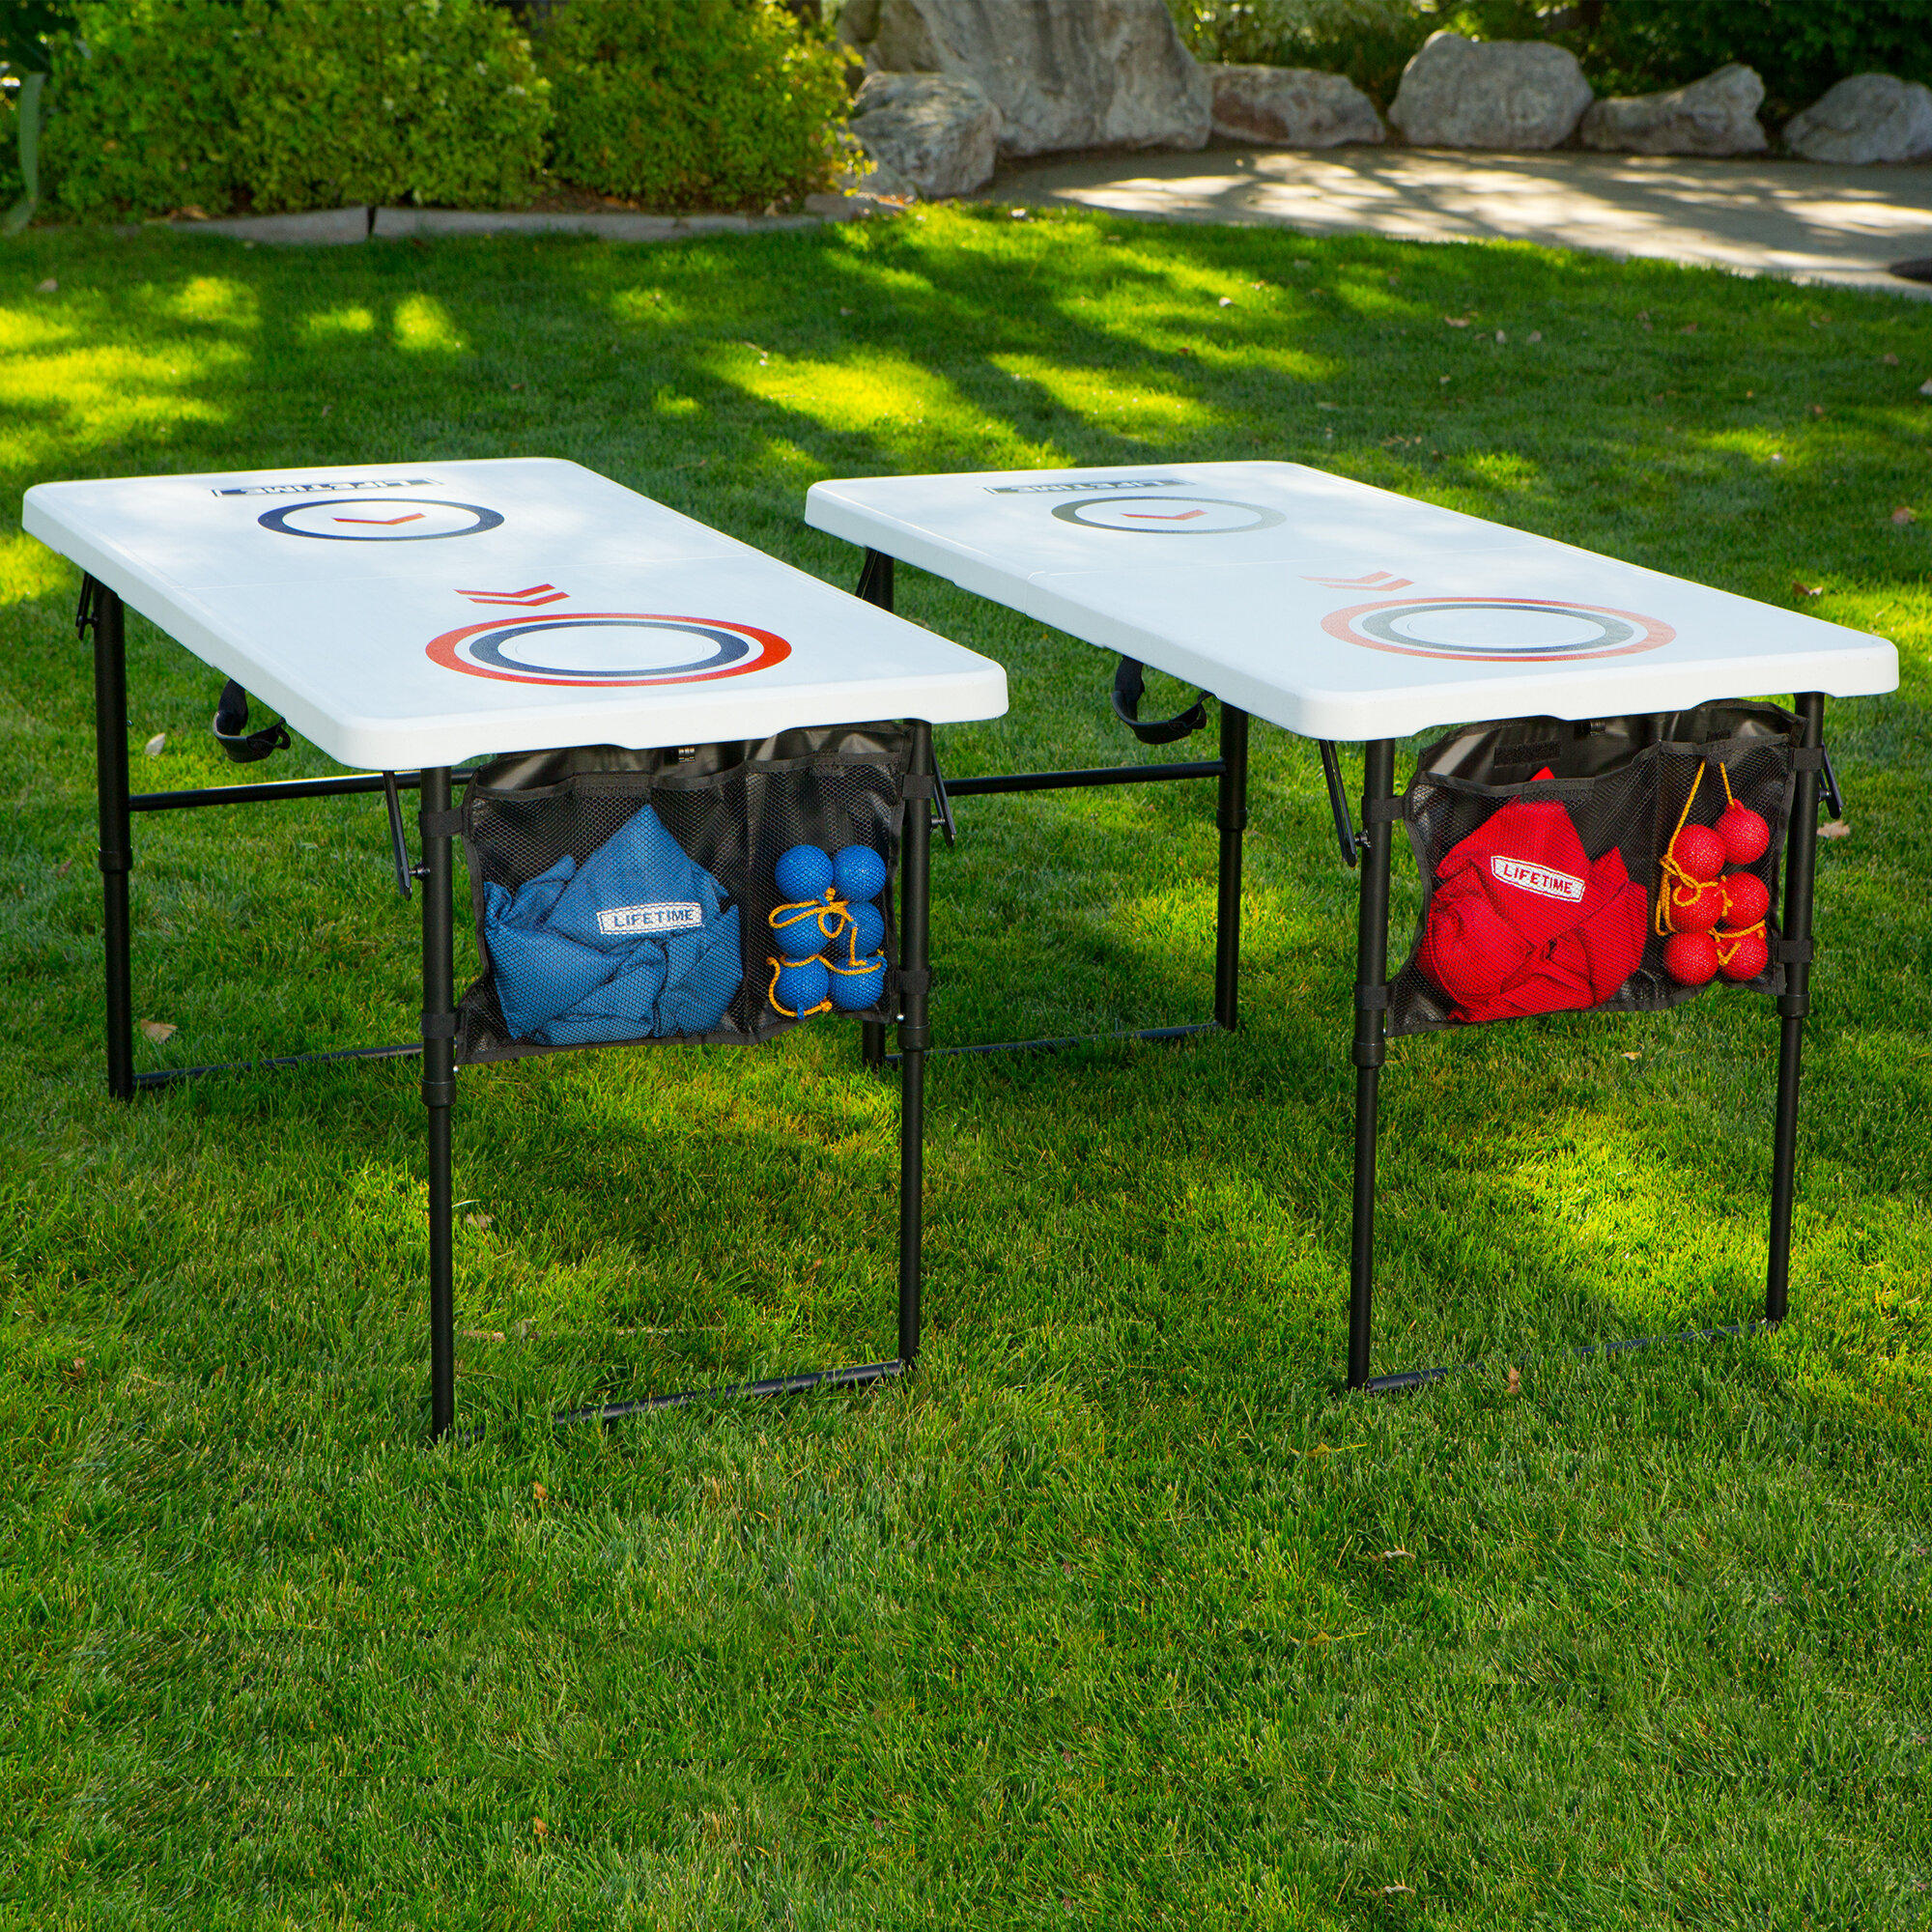 48 x 24 x 27.5 inches; 48 Pounds Lifetime Heavy Duty Outdoor Cornhole Ladderball Game and Table Combo Set 